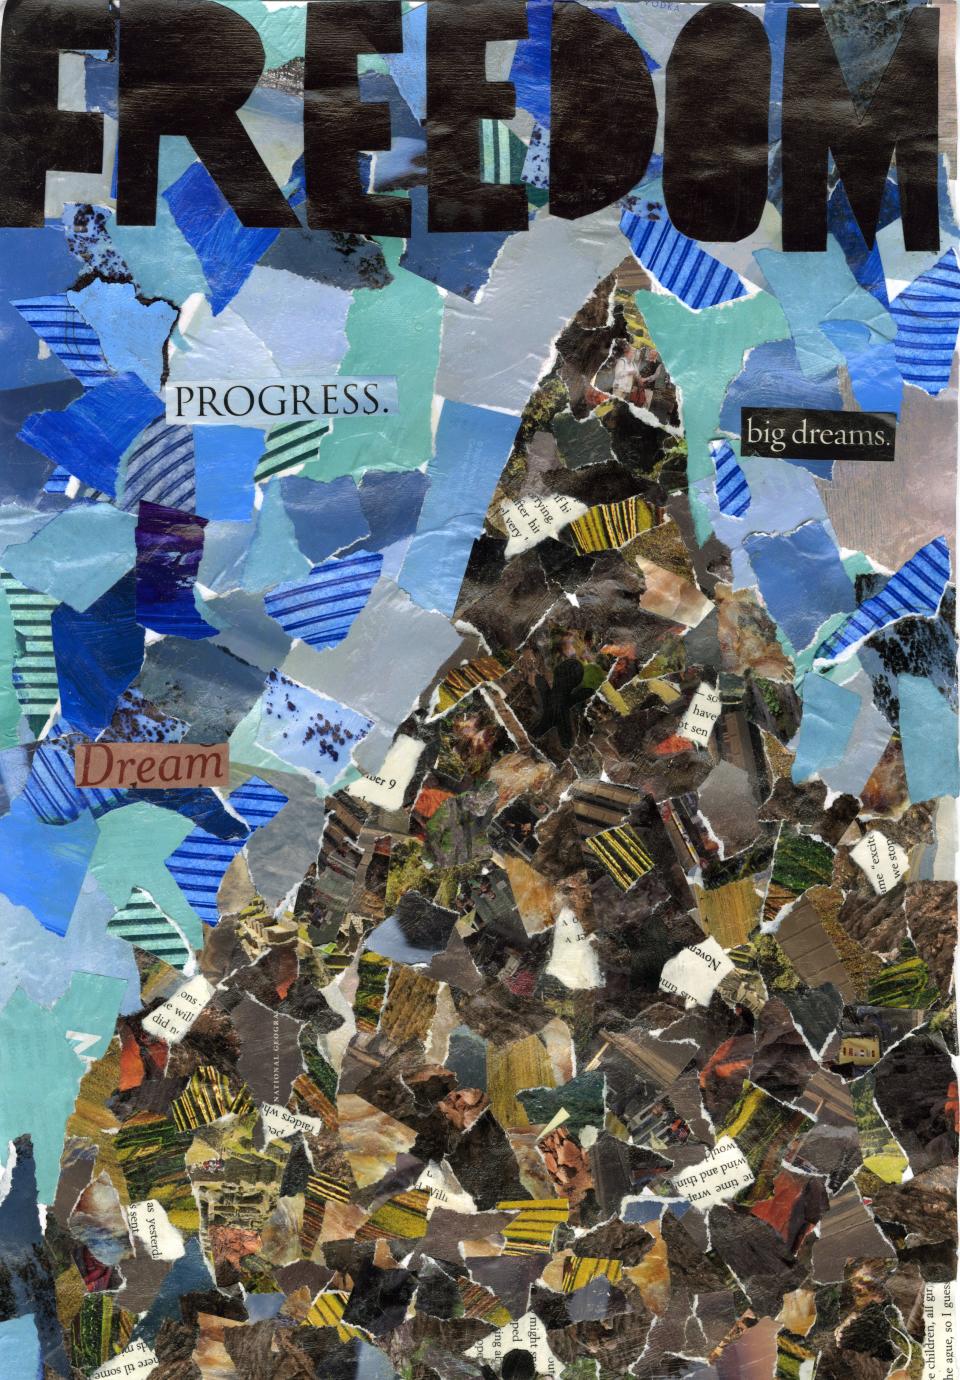 Zoe Van Rite's collage is one of the entries being considered for the poster essay in the category of Grades 4-6. The theme for the 28th Annual Brown County Martin Luther King Jr. Celebration is "Reaching the mountaintop: How do we get there?"